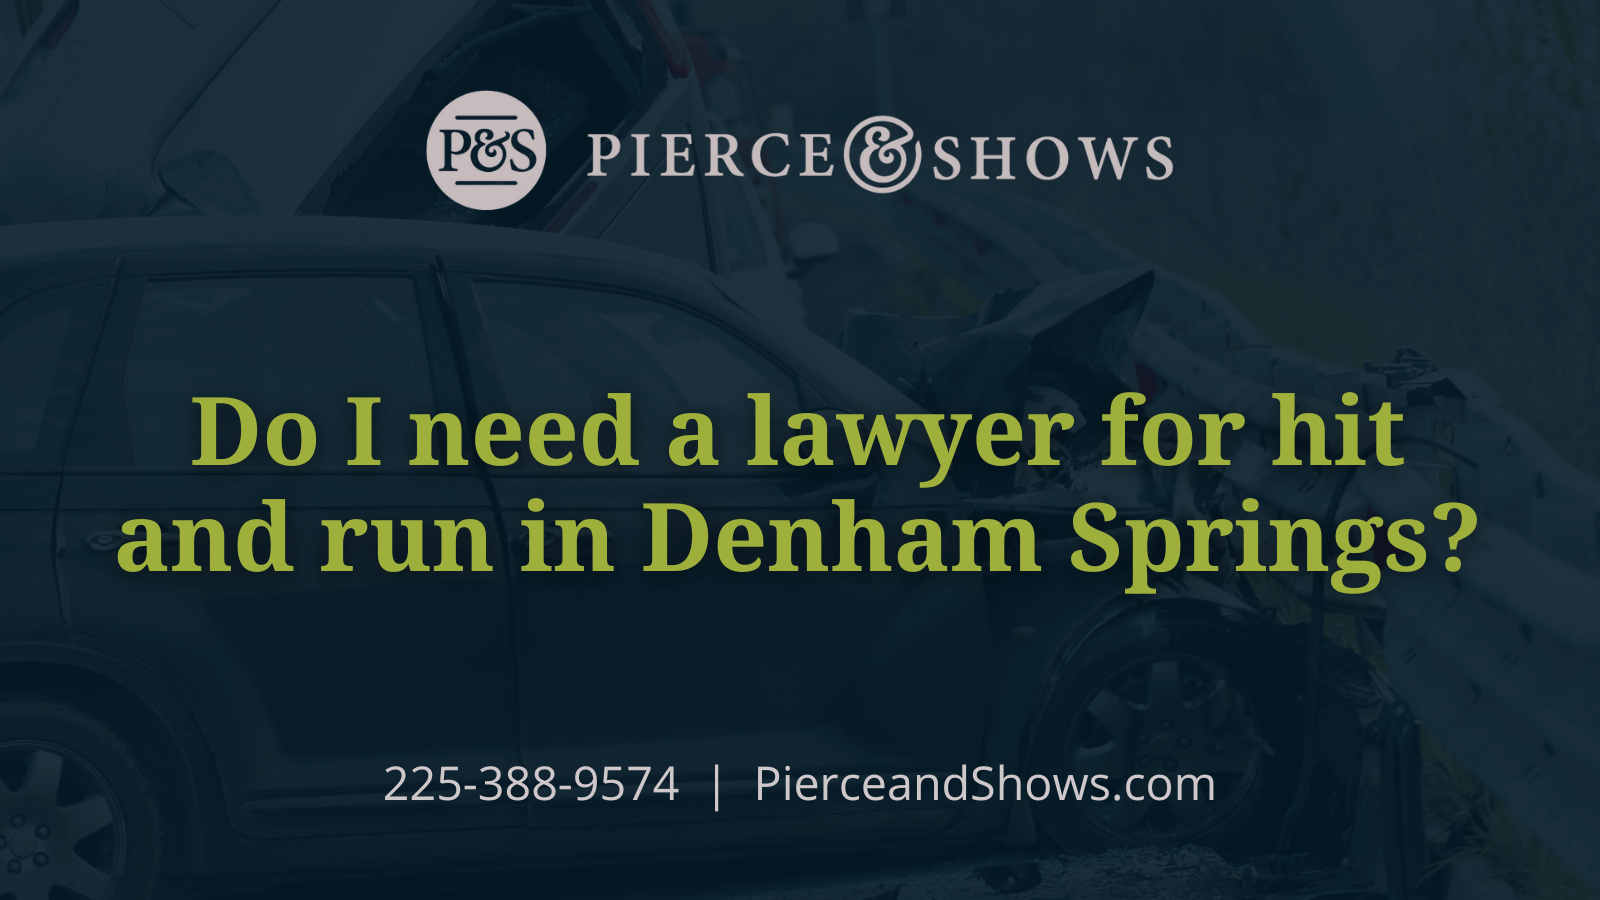 Do I need a lawyer for hit and run in Denham Springs - Baton Rouge Louisiana injury attorney Pierce & Shows